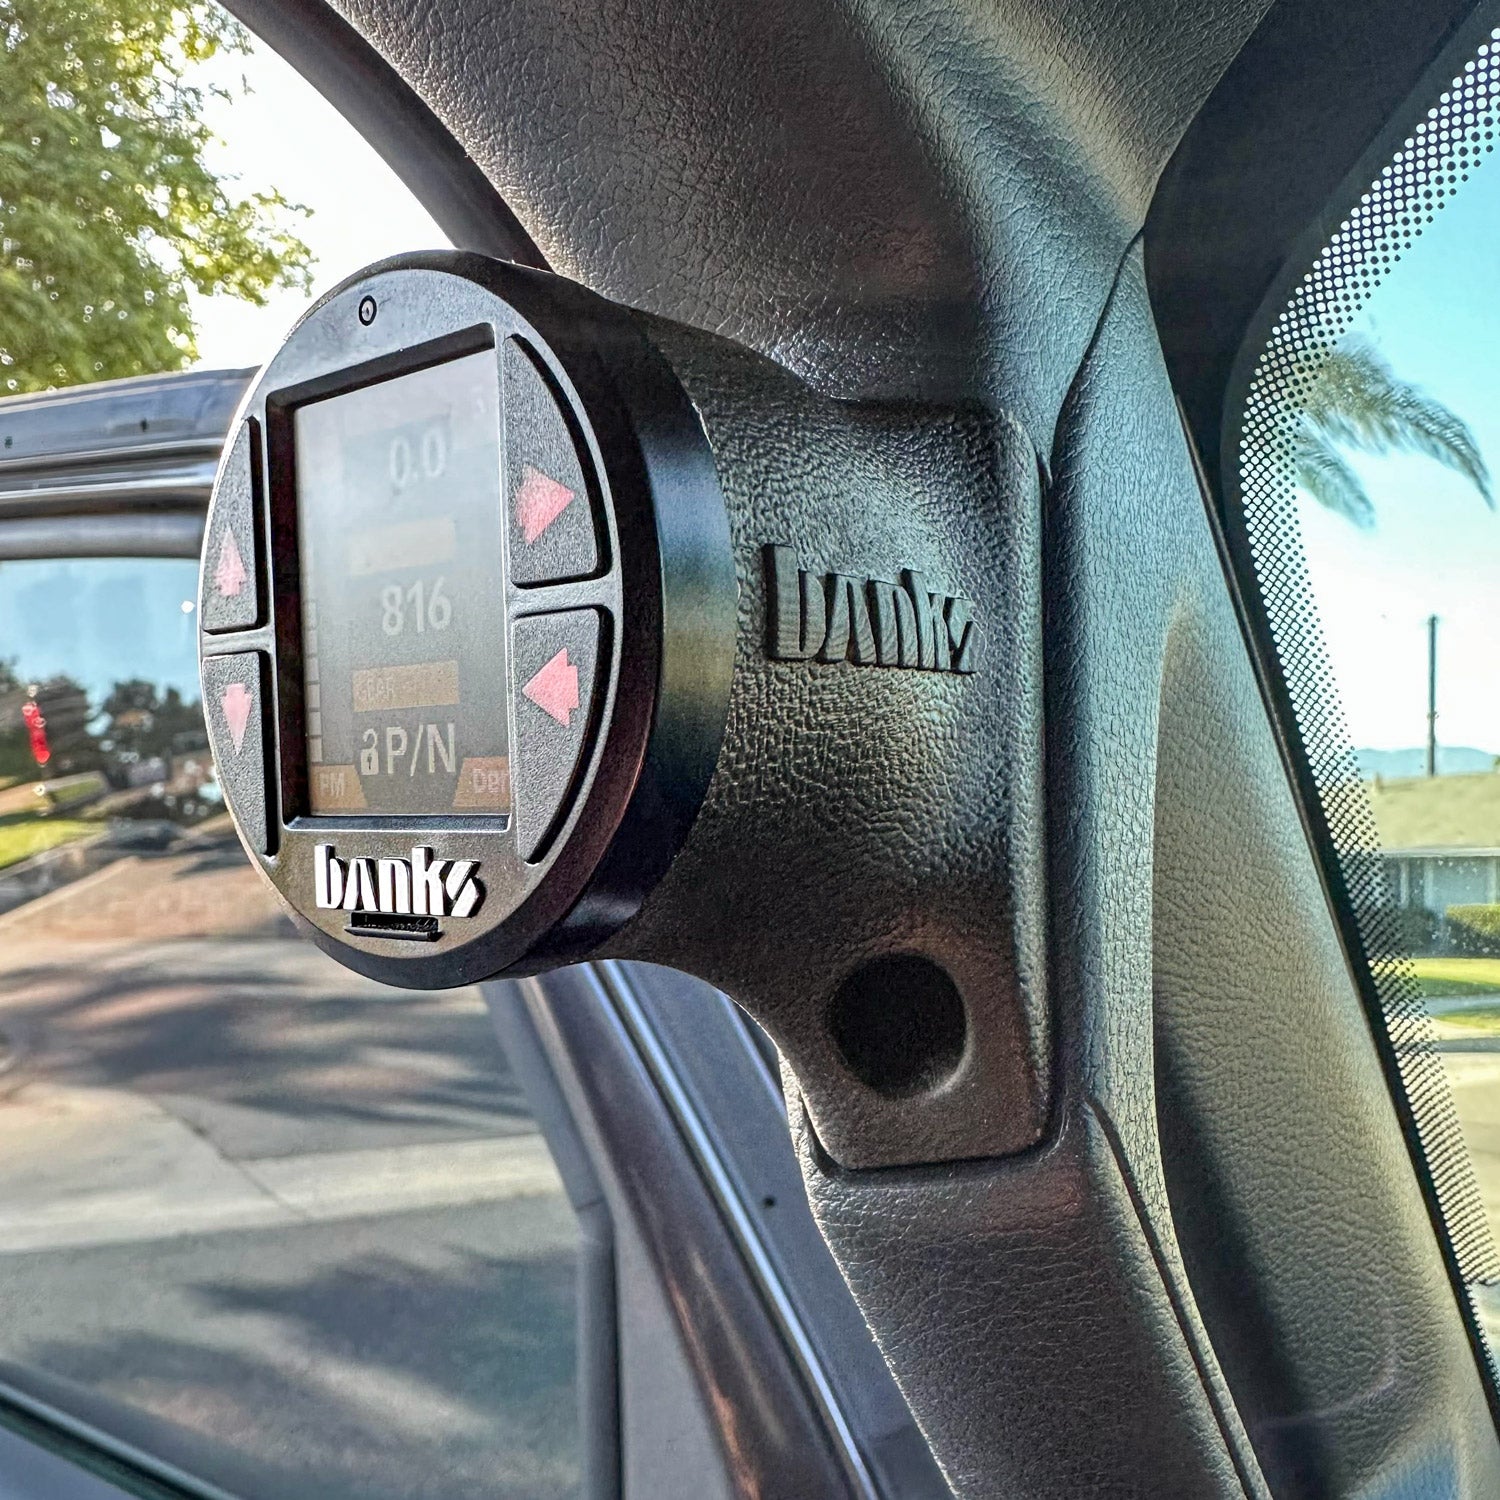 iDash Stealths Pod installed on customer vehicle from other side